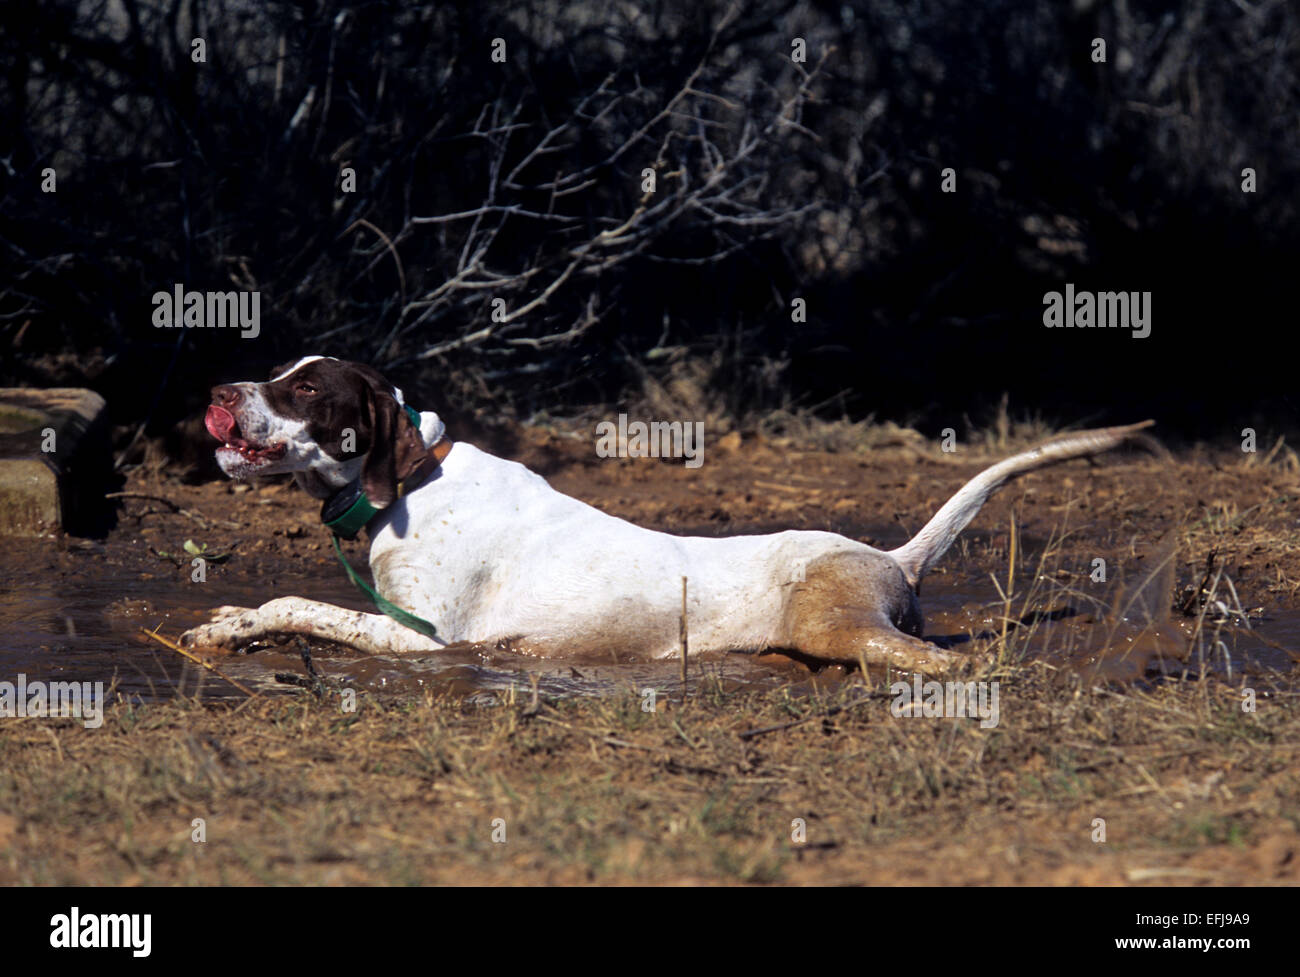 An English Pointer dog drinks from a mud puddle on a hit day of quail hunting South Texas Stock Photo